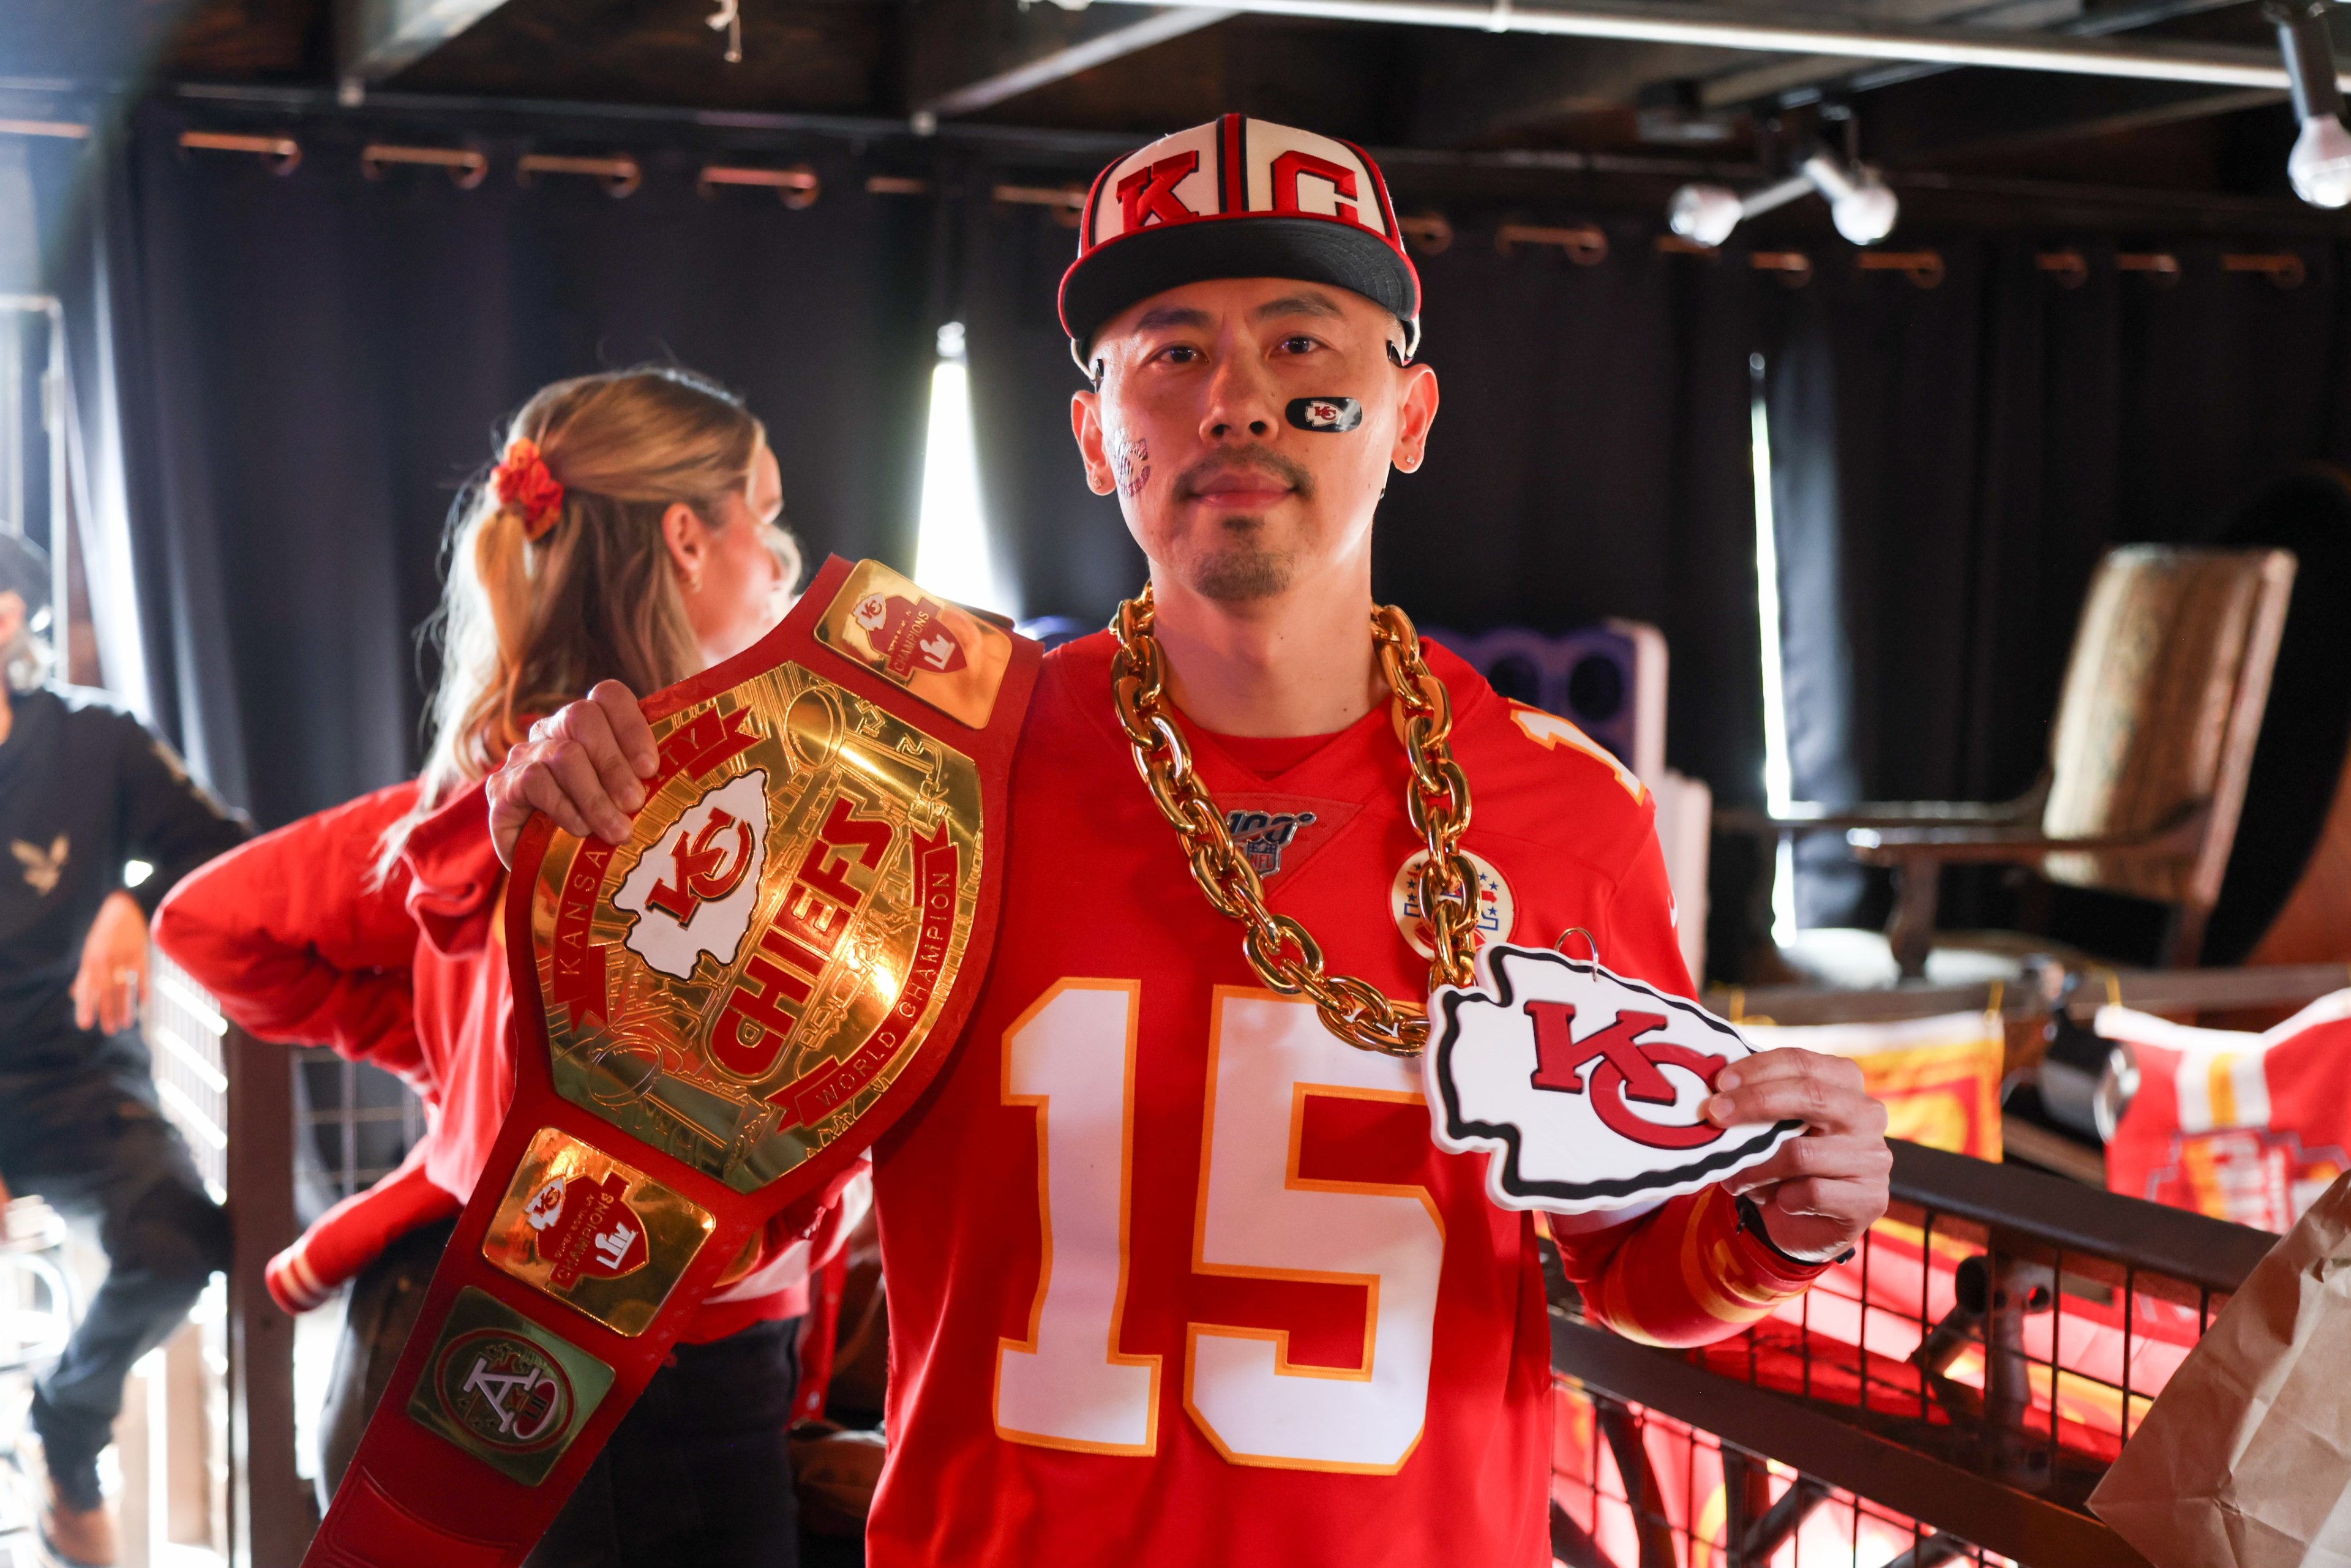 Kansas City Chiefs fan shows off belt and necklace